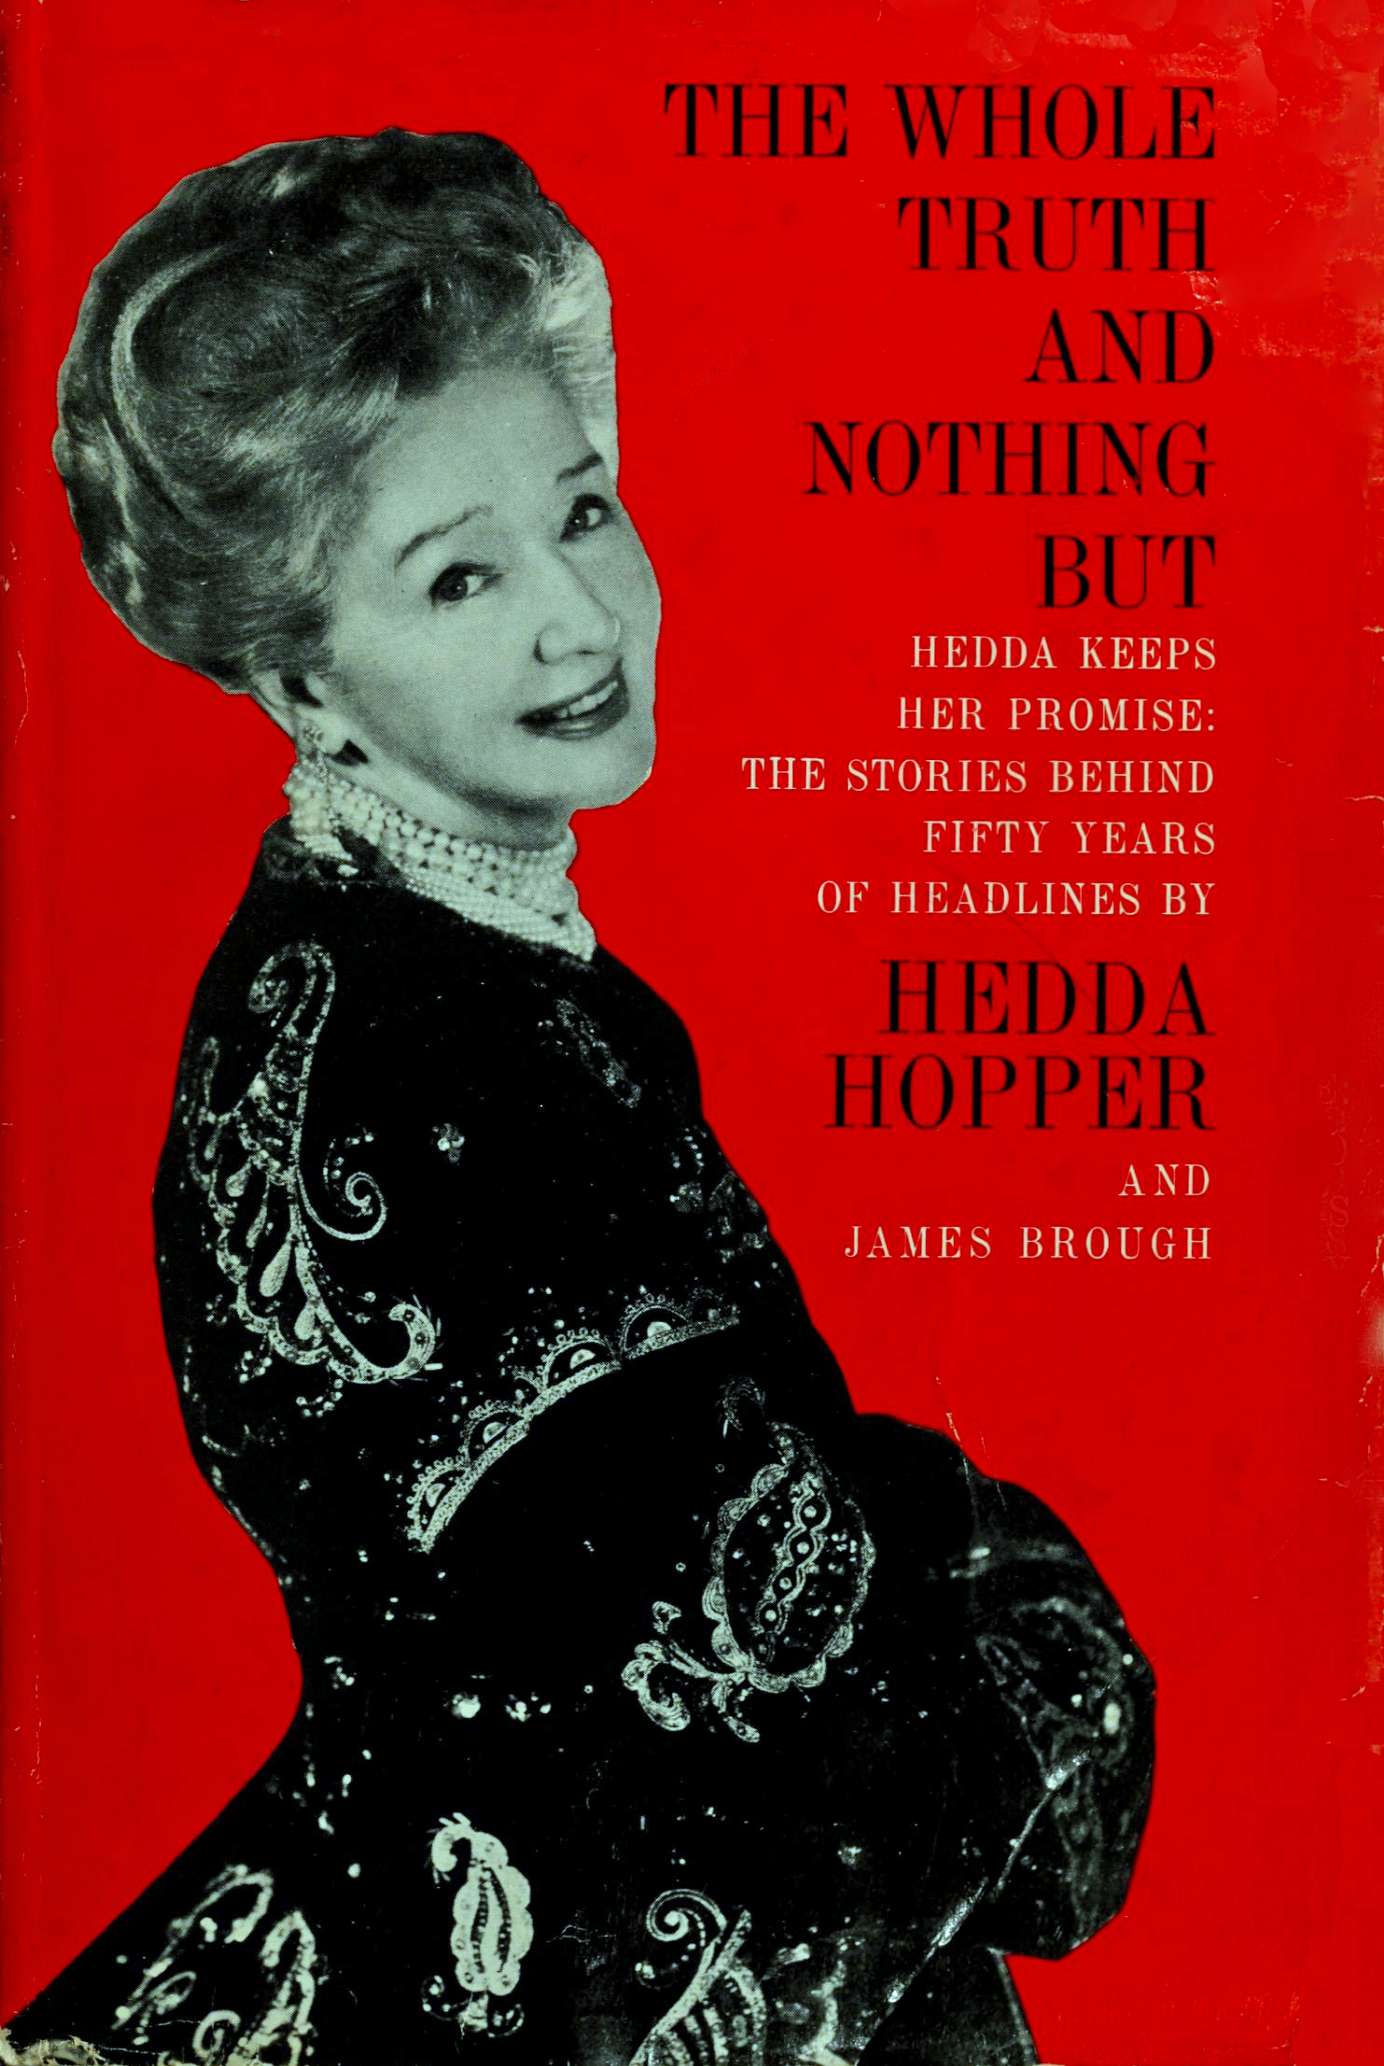 The Whole Truth And Nothing But, by Hedda Hopper and James Brough—A Project Gutenberg eBook pic